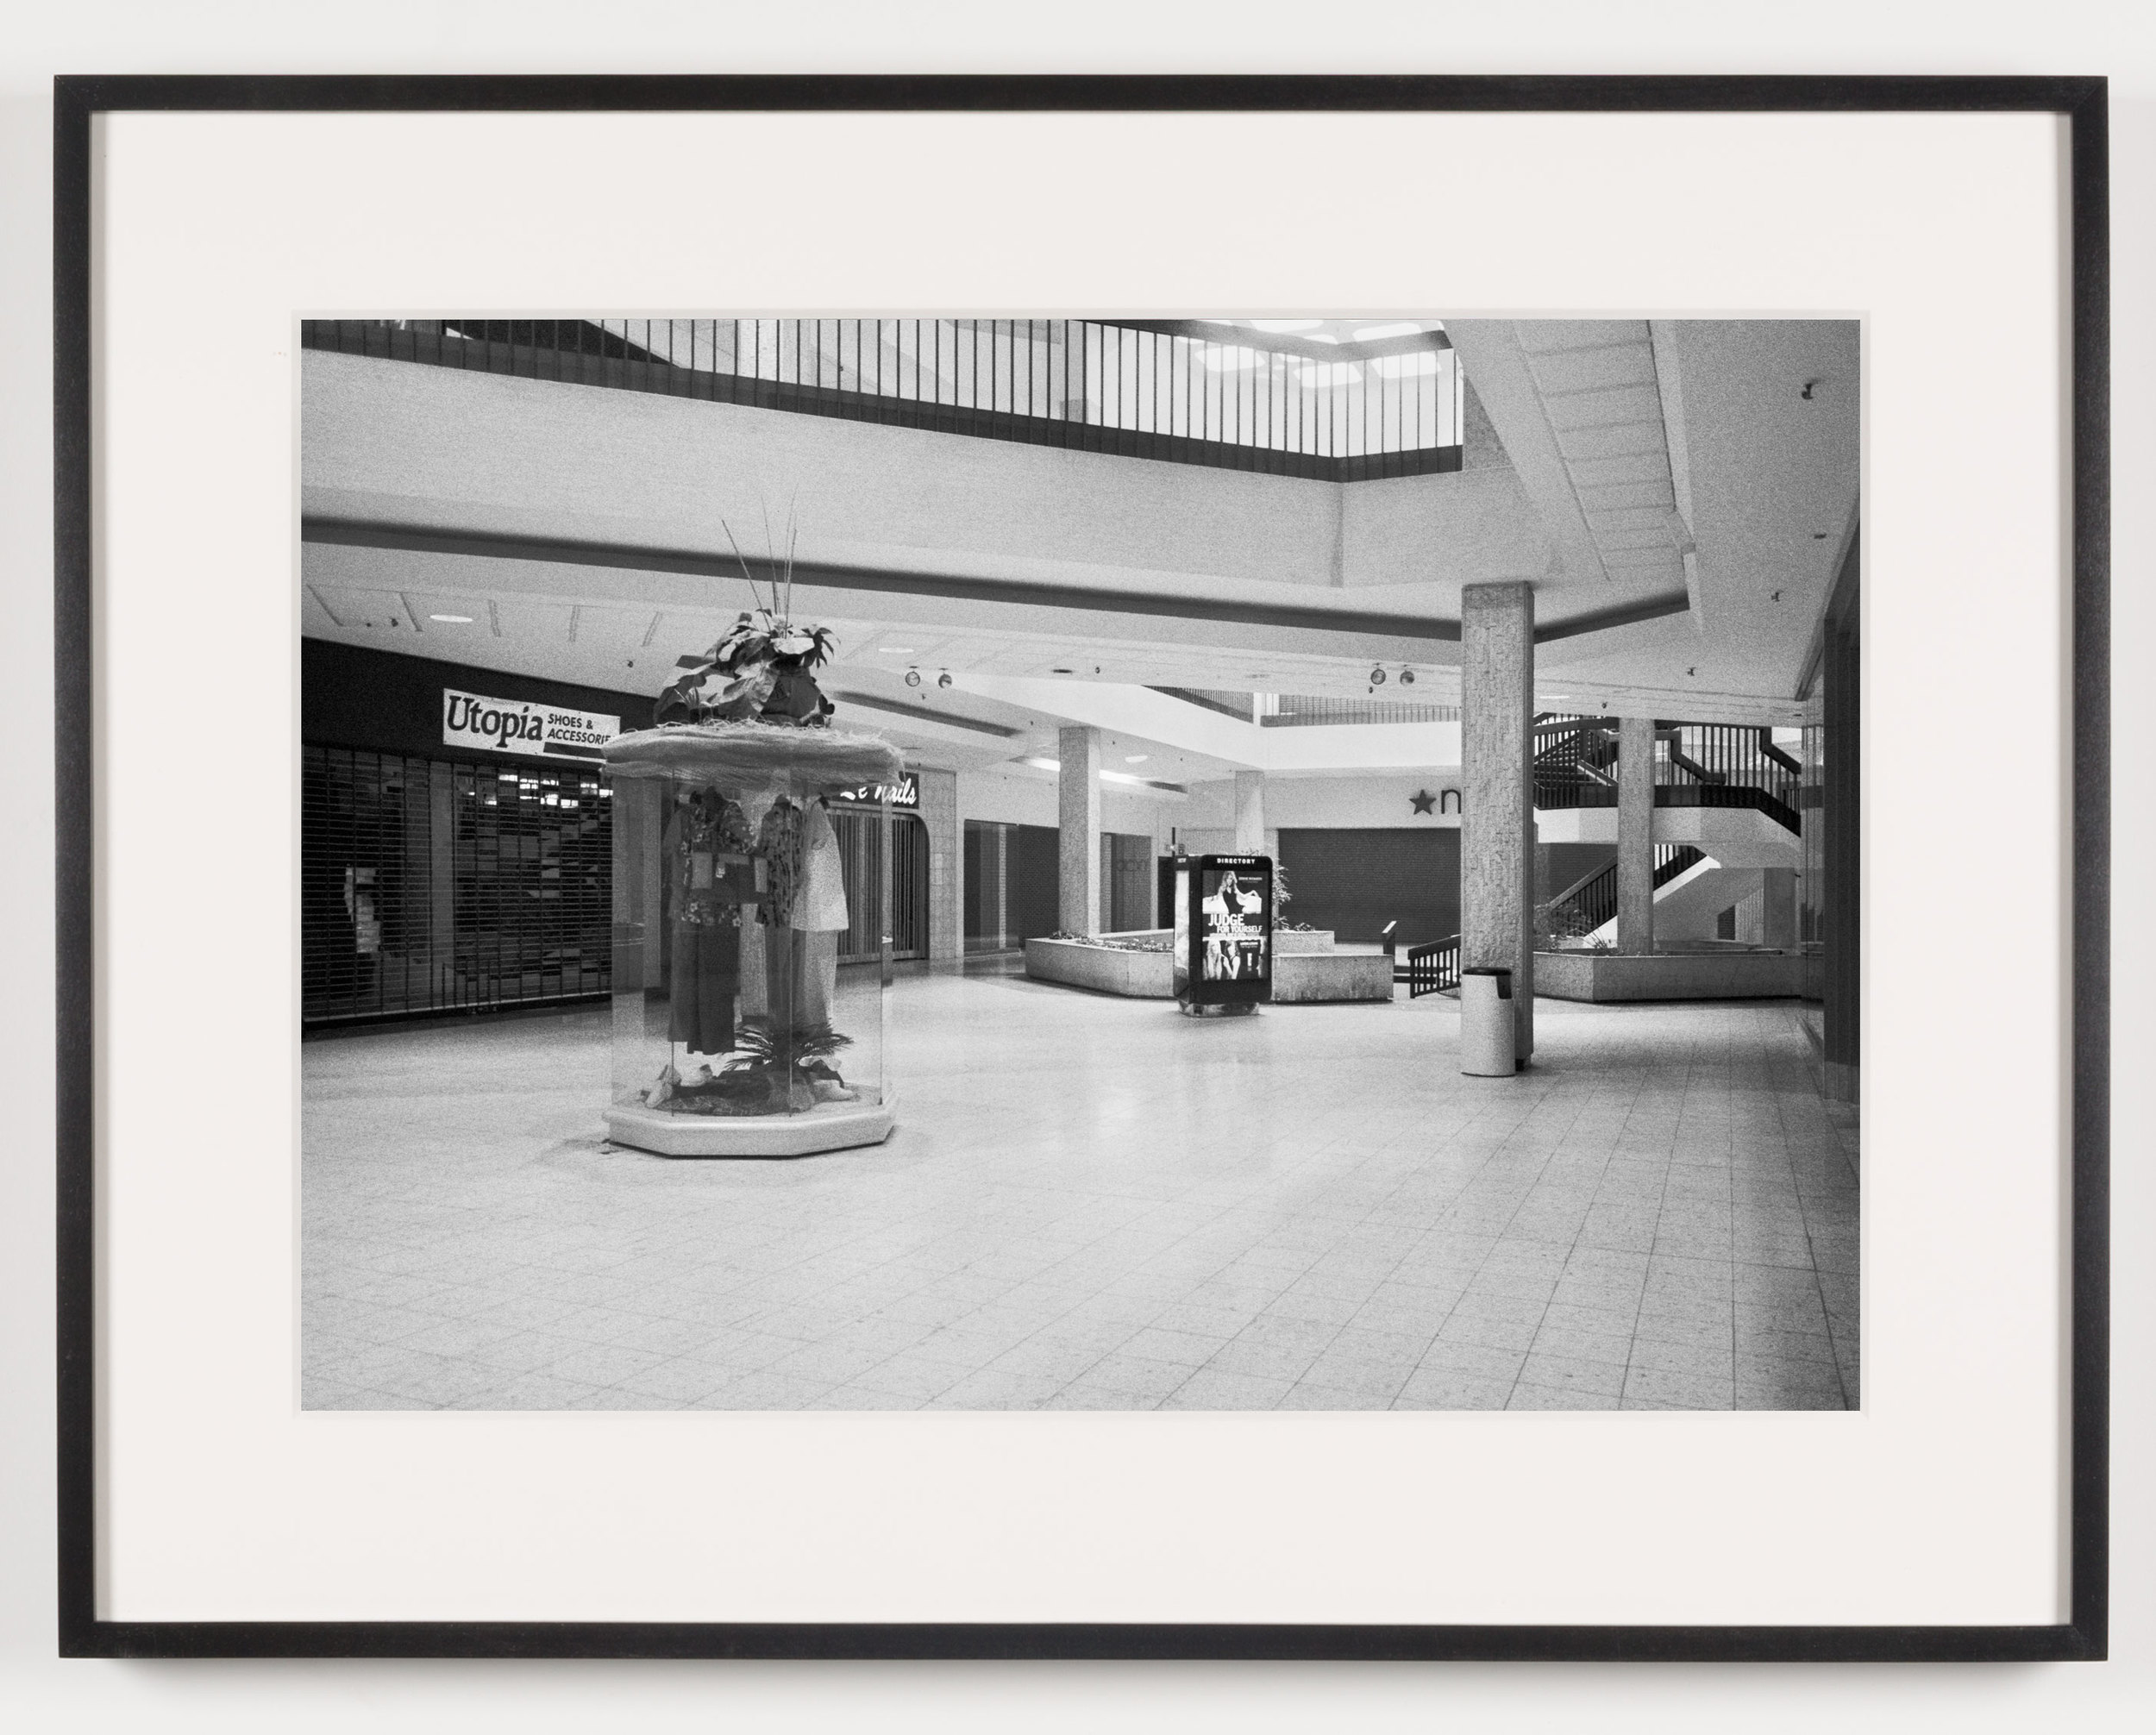   Randall Park Mall ('Utopia Shoes &amp; Accessories,' 'Le Nails,' 'Macy's'), North Randall, OH, Est. 1976, Demo. 2014    2011   Epson Ultrachrome K3 archival ink jet print on Hahnemühle Photo Rag paper  21 5/8 x 28 1/8 inches  Exhibition:   A Diagra